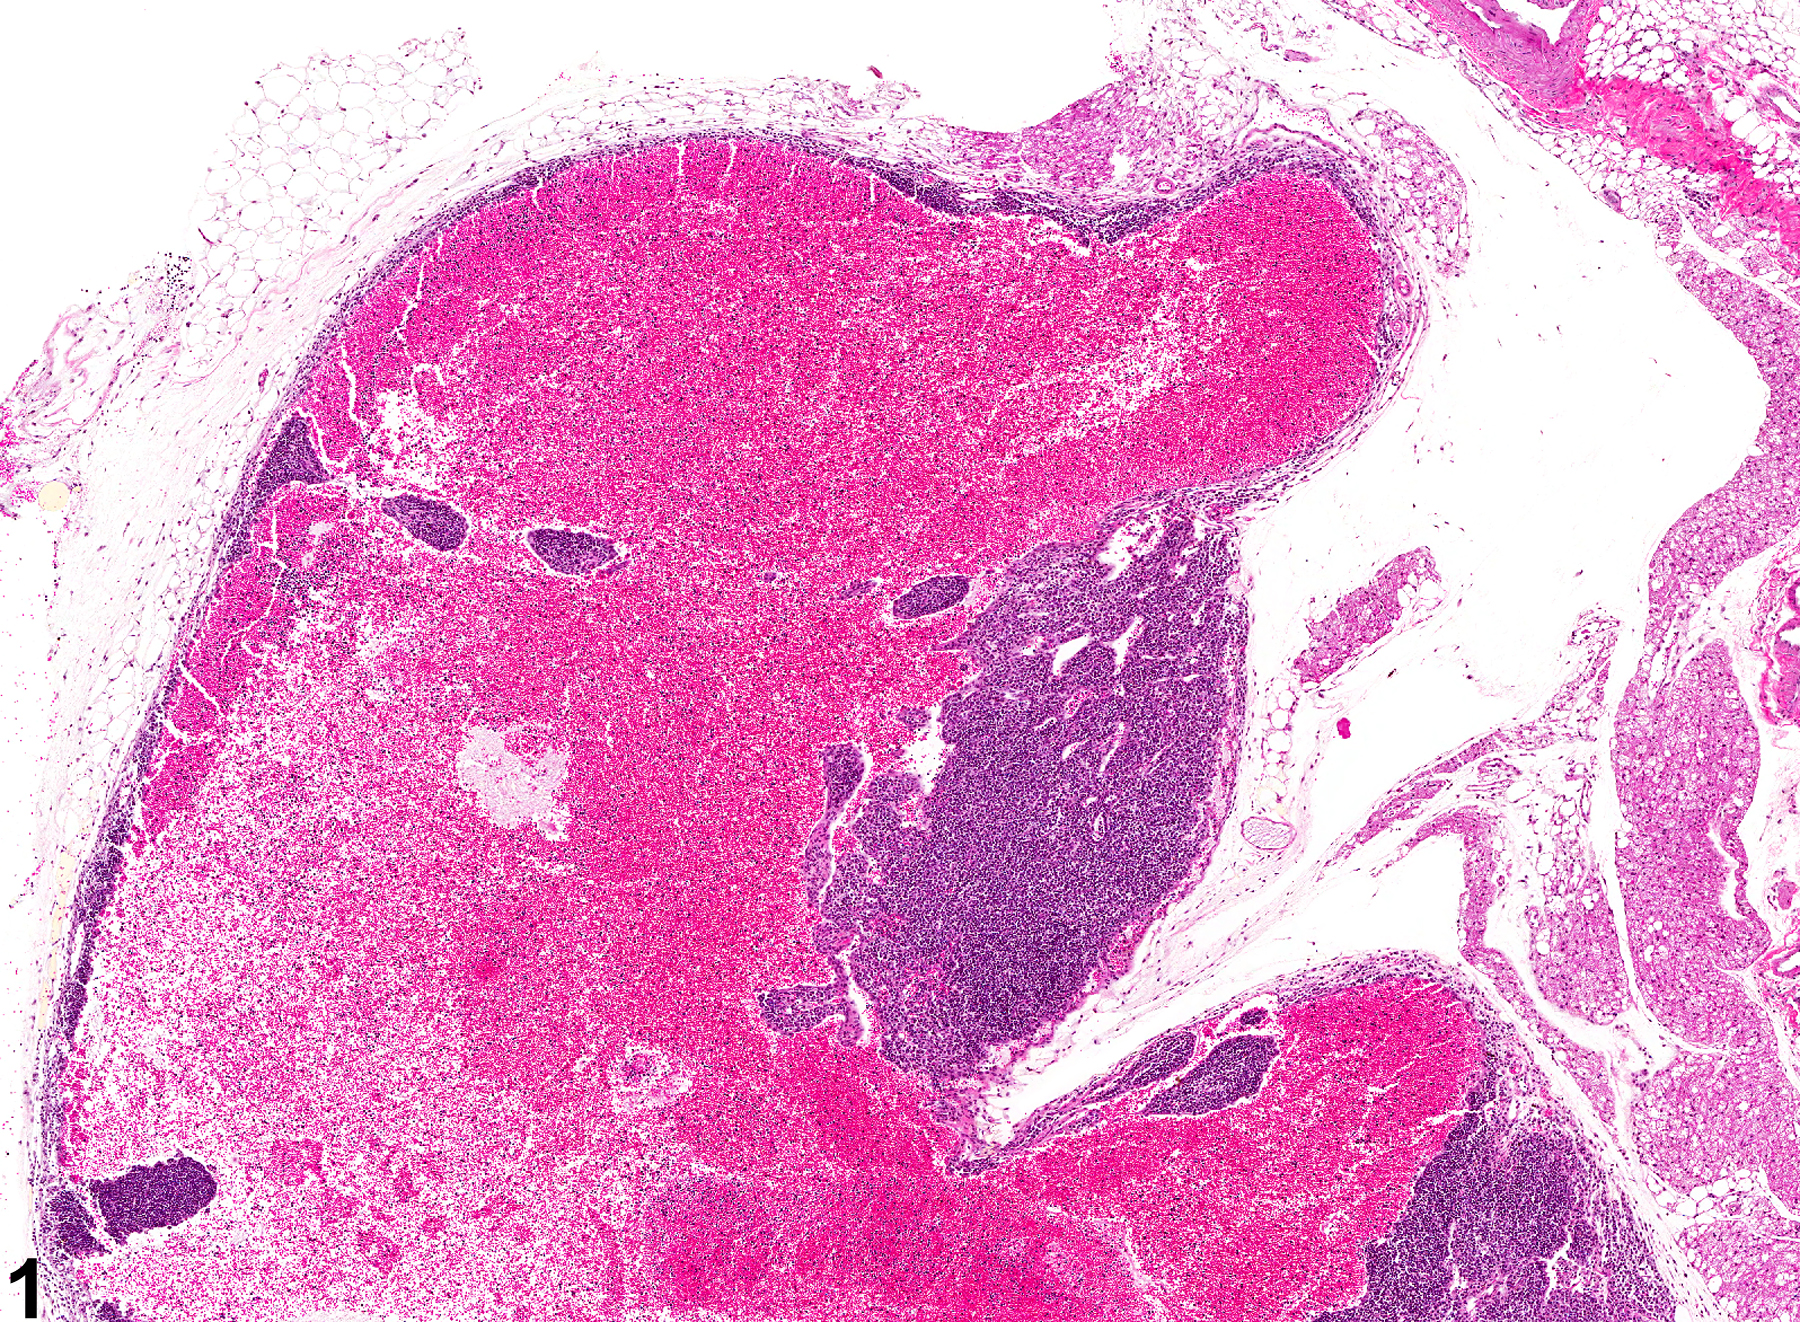 Image of angiectasis in the lymph node from a female B6C3F1/N mouse in a chronic study